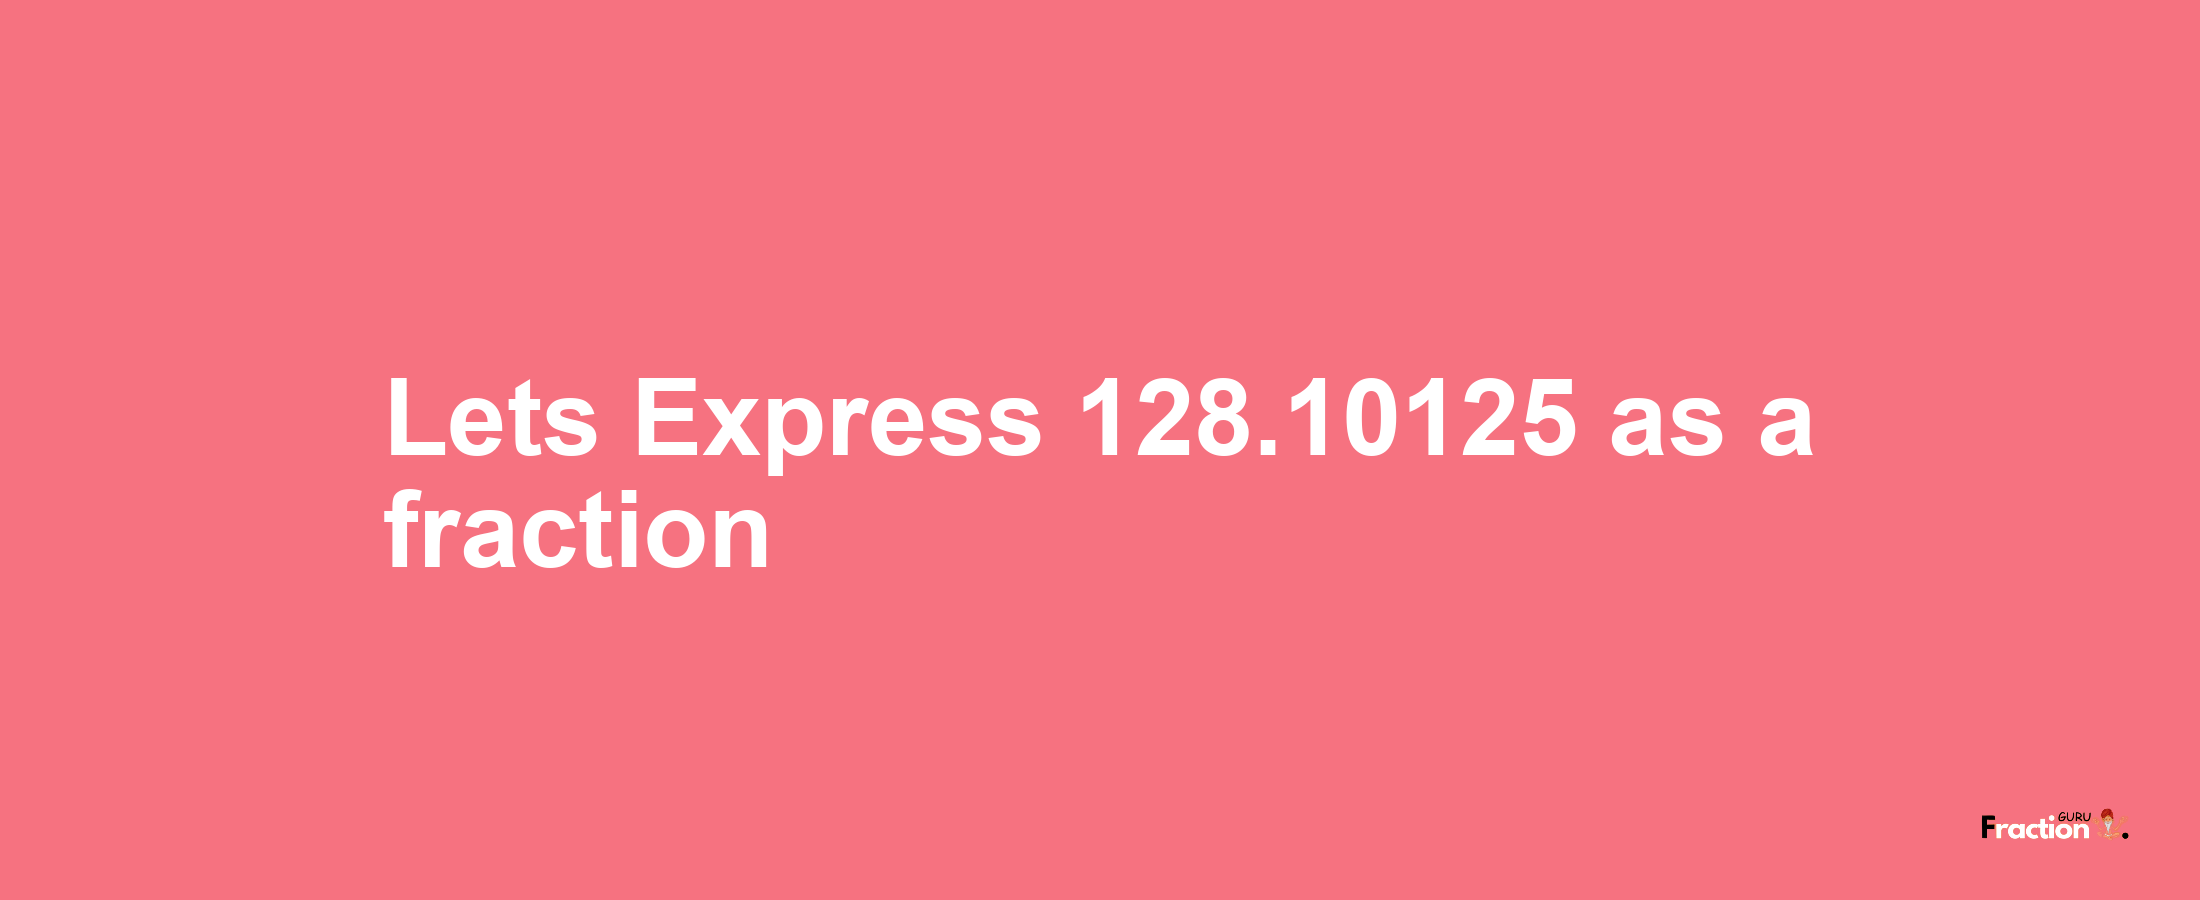 Lets Express 128.10125 as afraction